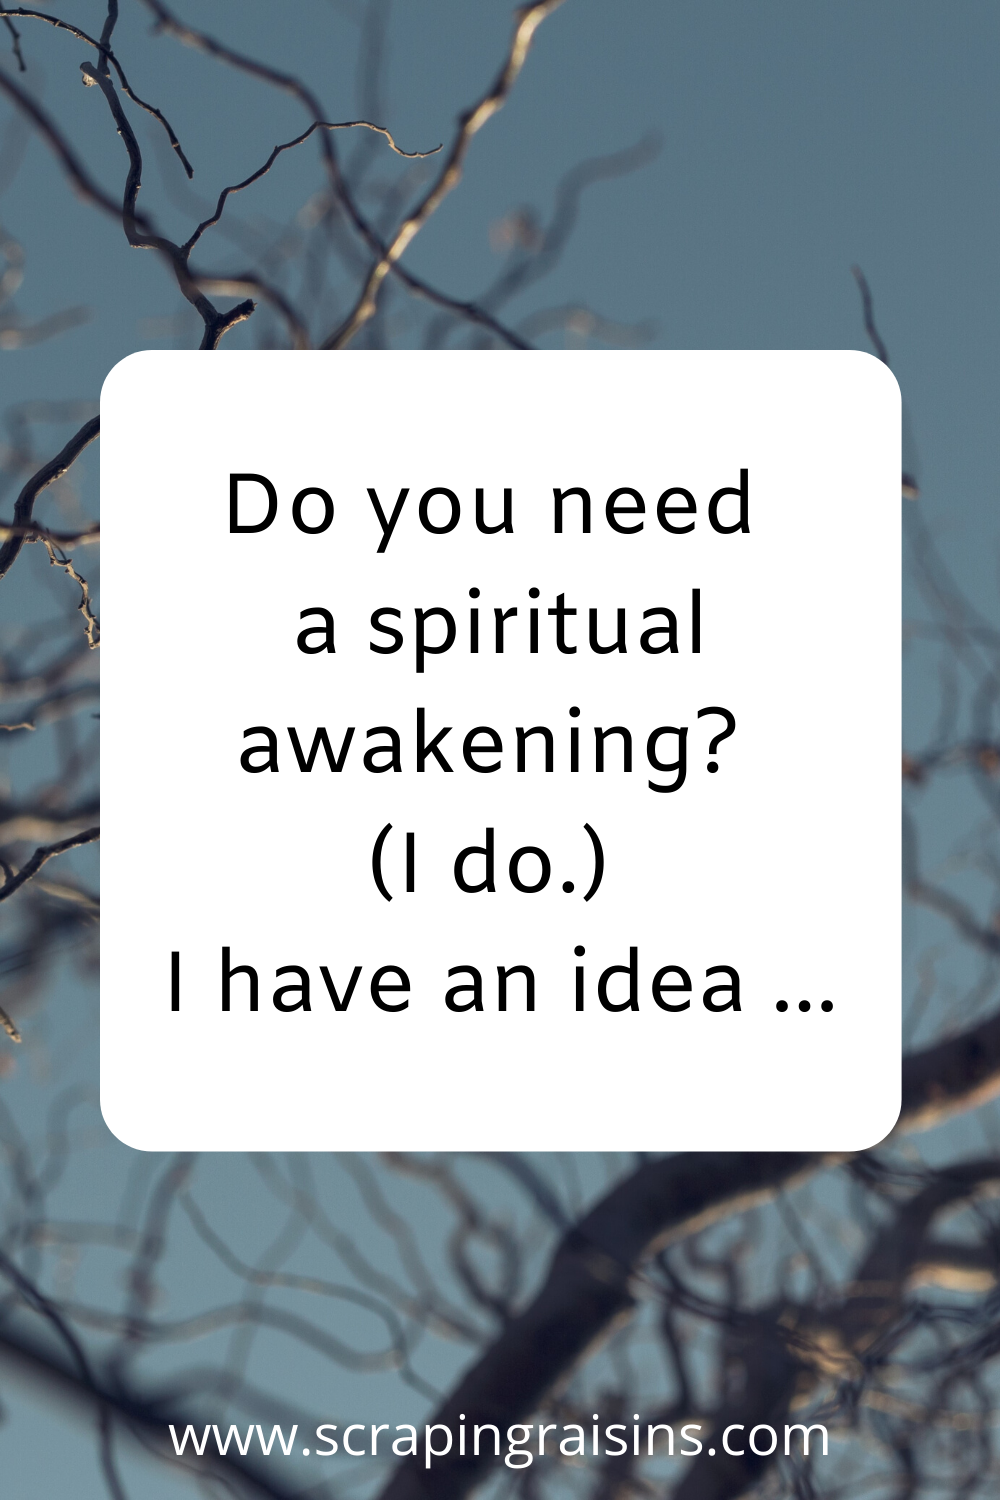 I don't know about you, but I've been spiritually asleep for too long now. Would you consider joining me in praying for a set amount of time every day during Lent? #Lent #Lent2020 #prayandwatch #prayer #Lentidea #Lentgoal #mindfulness 